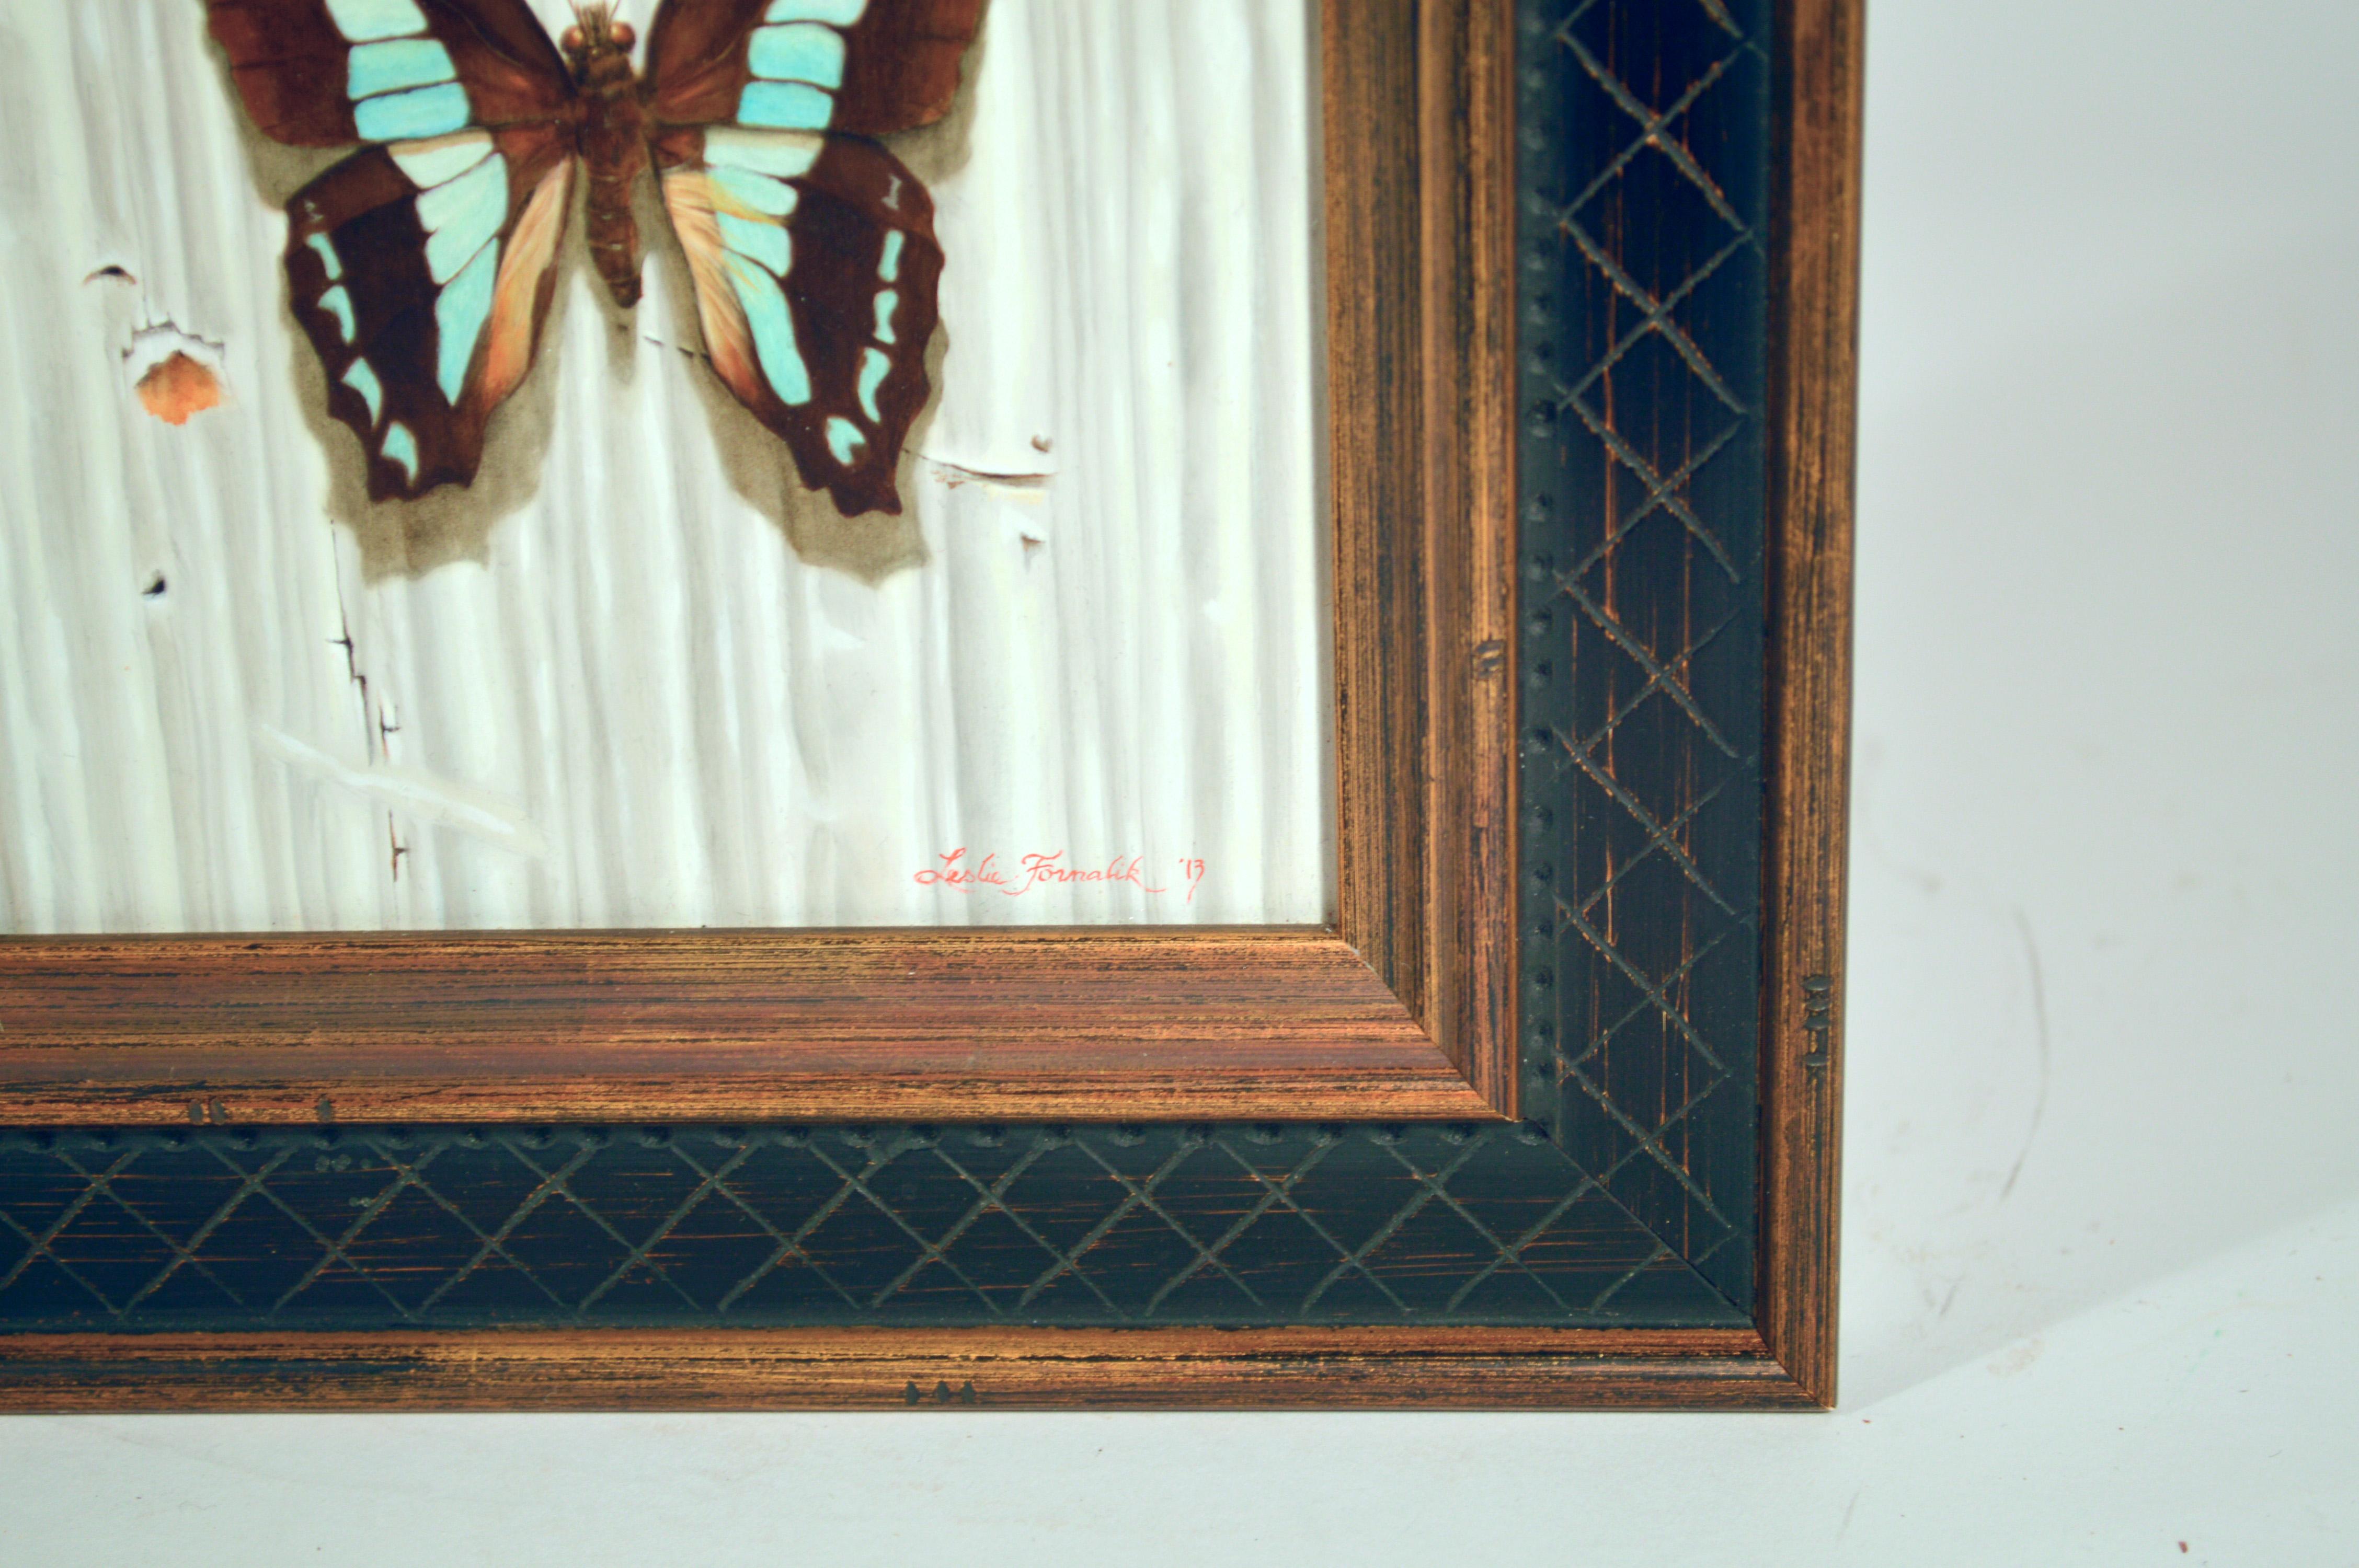 Leslie Formalik Trompe L'oeil paintings of butterflies,
Pair,
Dated 2013 and 2019

The pair of beautiful tromp l'oeil paintings each depict a different pinned butterfly against a faux wood ground. One signed Leslie Formalik, 2013 and one Leslie